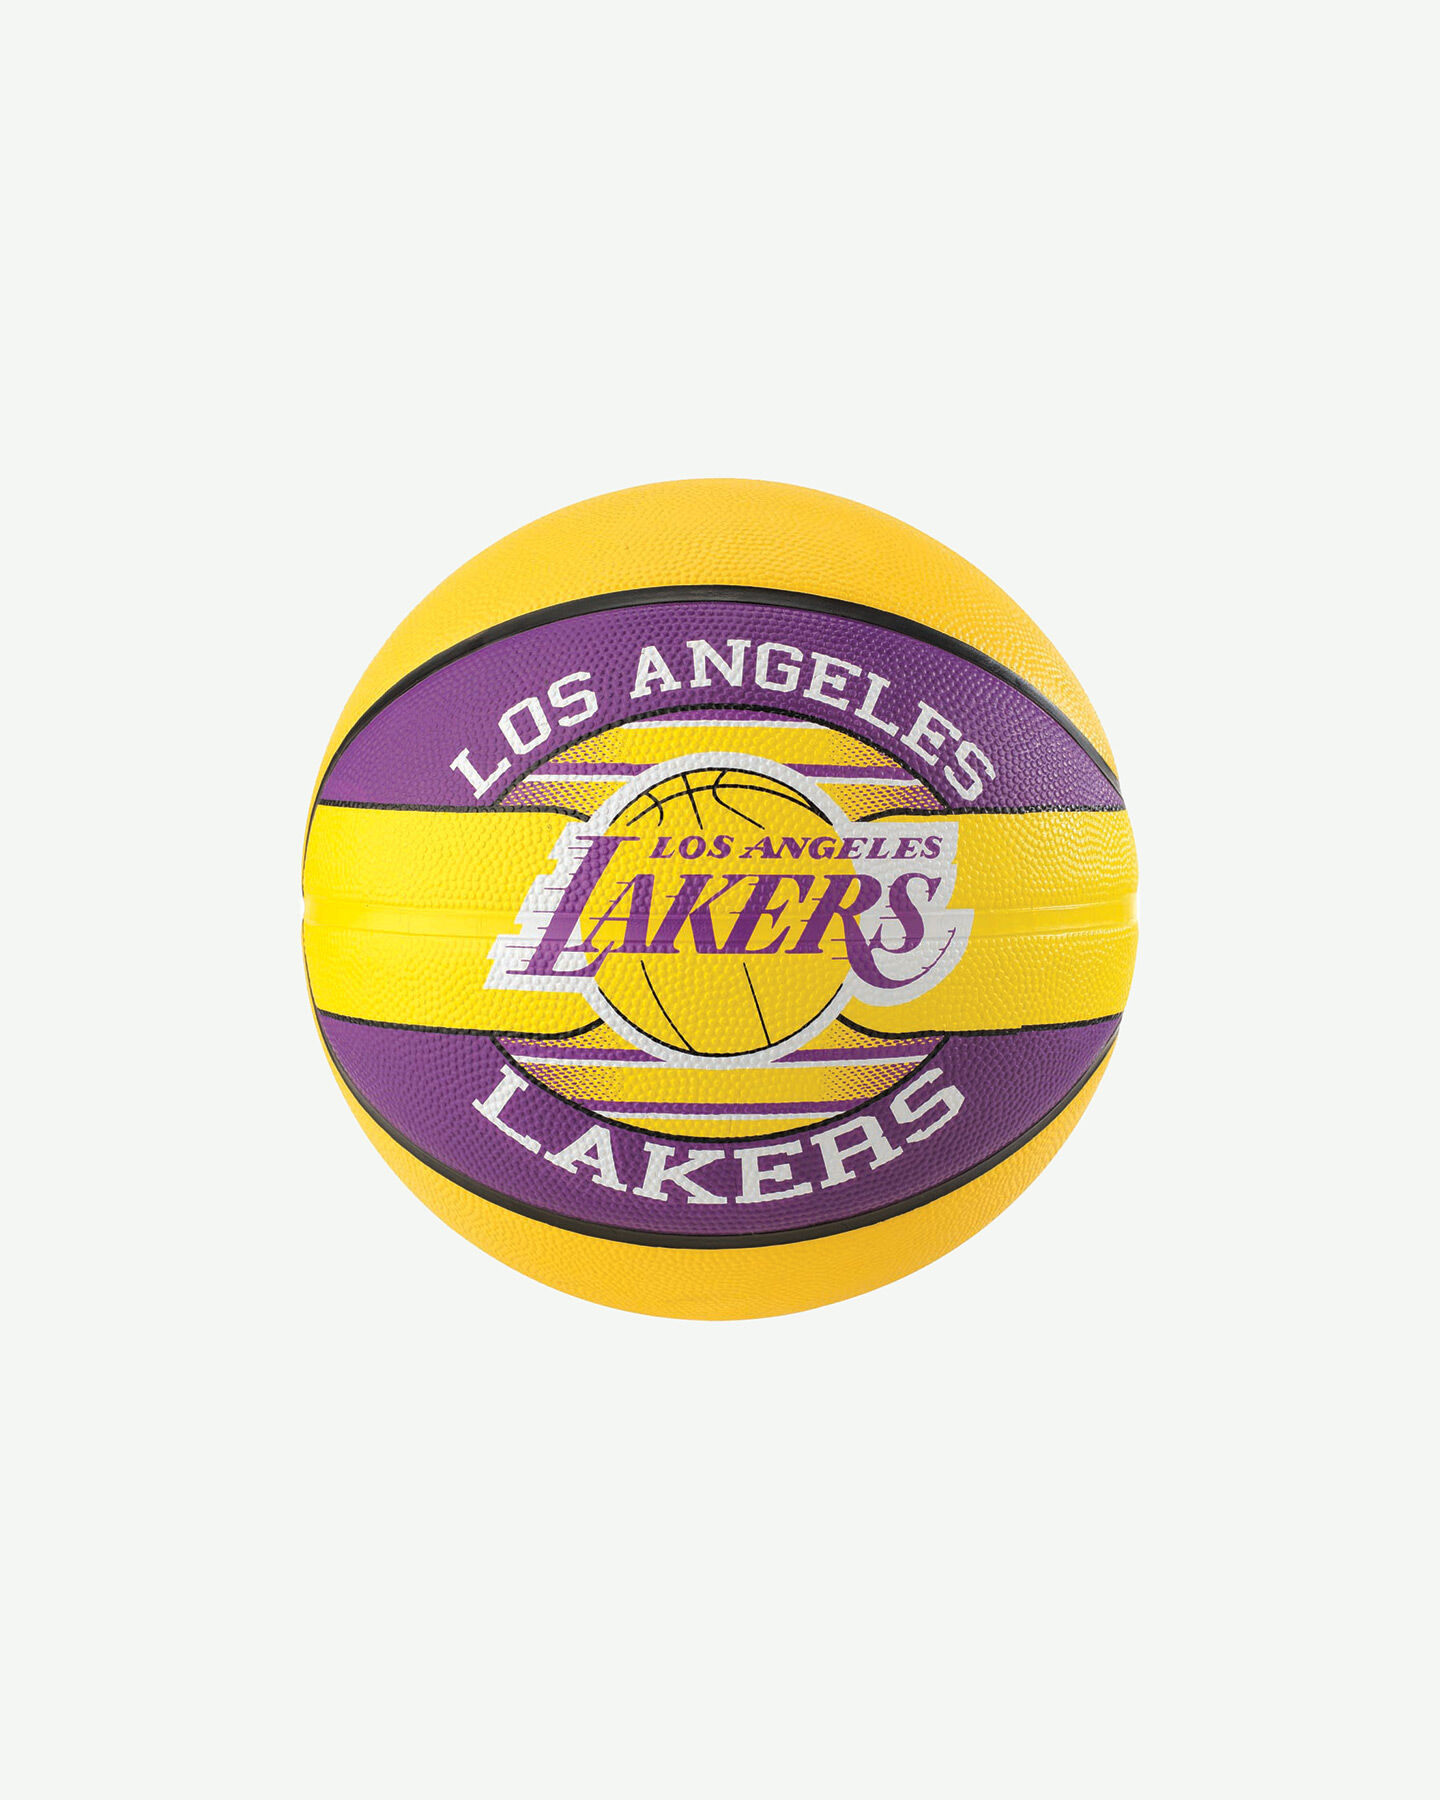  Pallone basket SPALDING LOS ANGELES LAKERS MIS7 S1319335|UNI|7 scatto 0